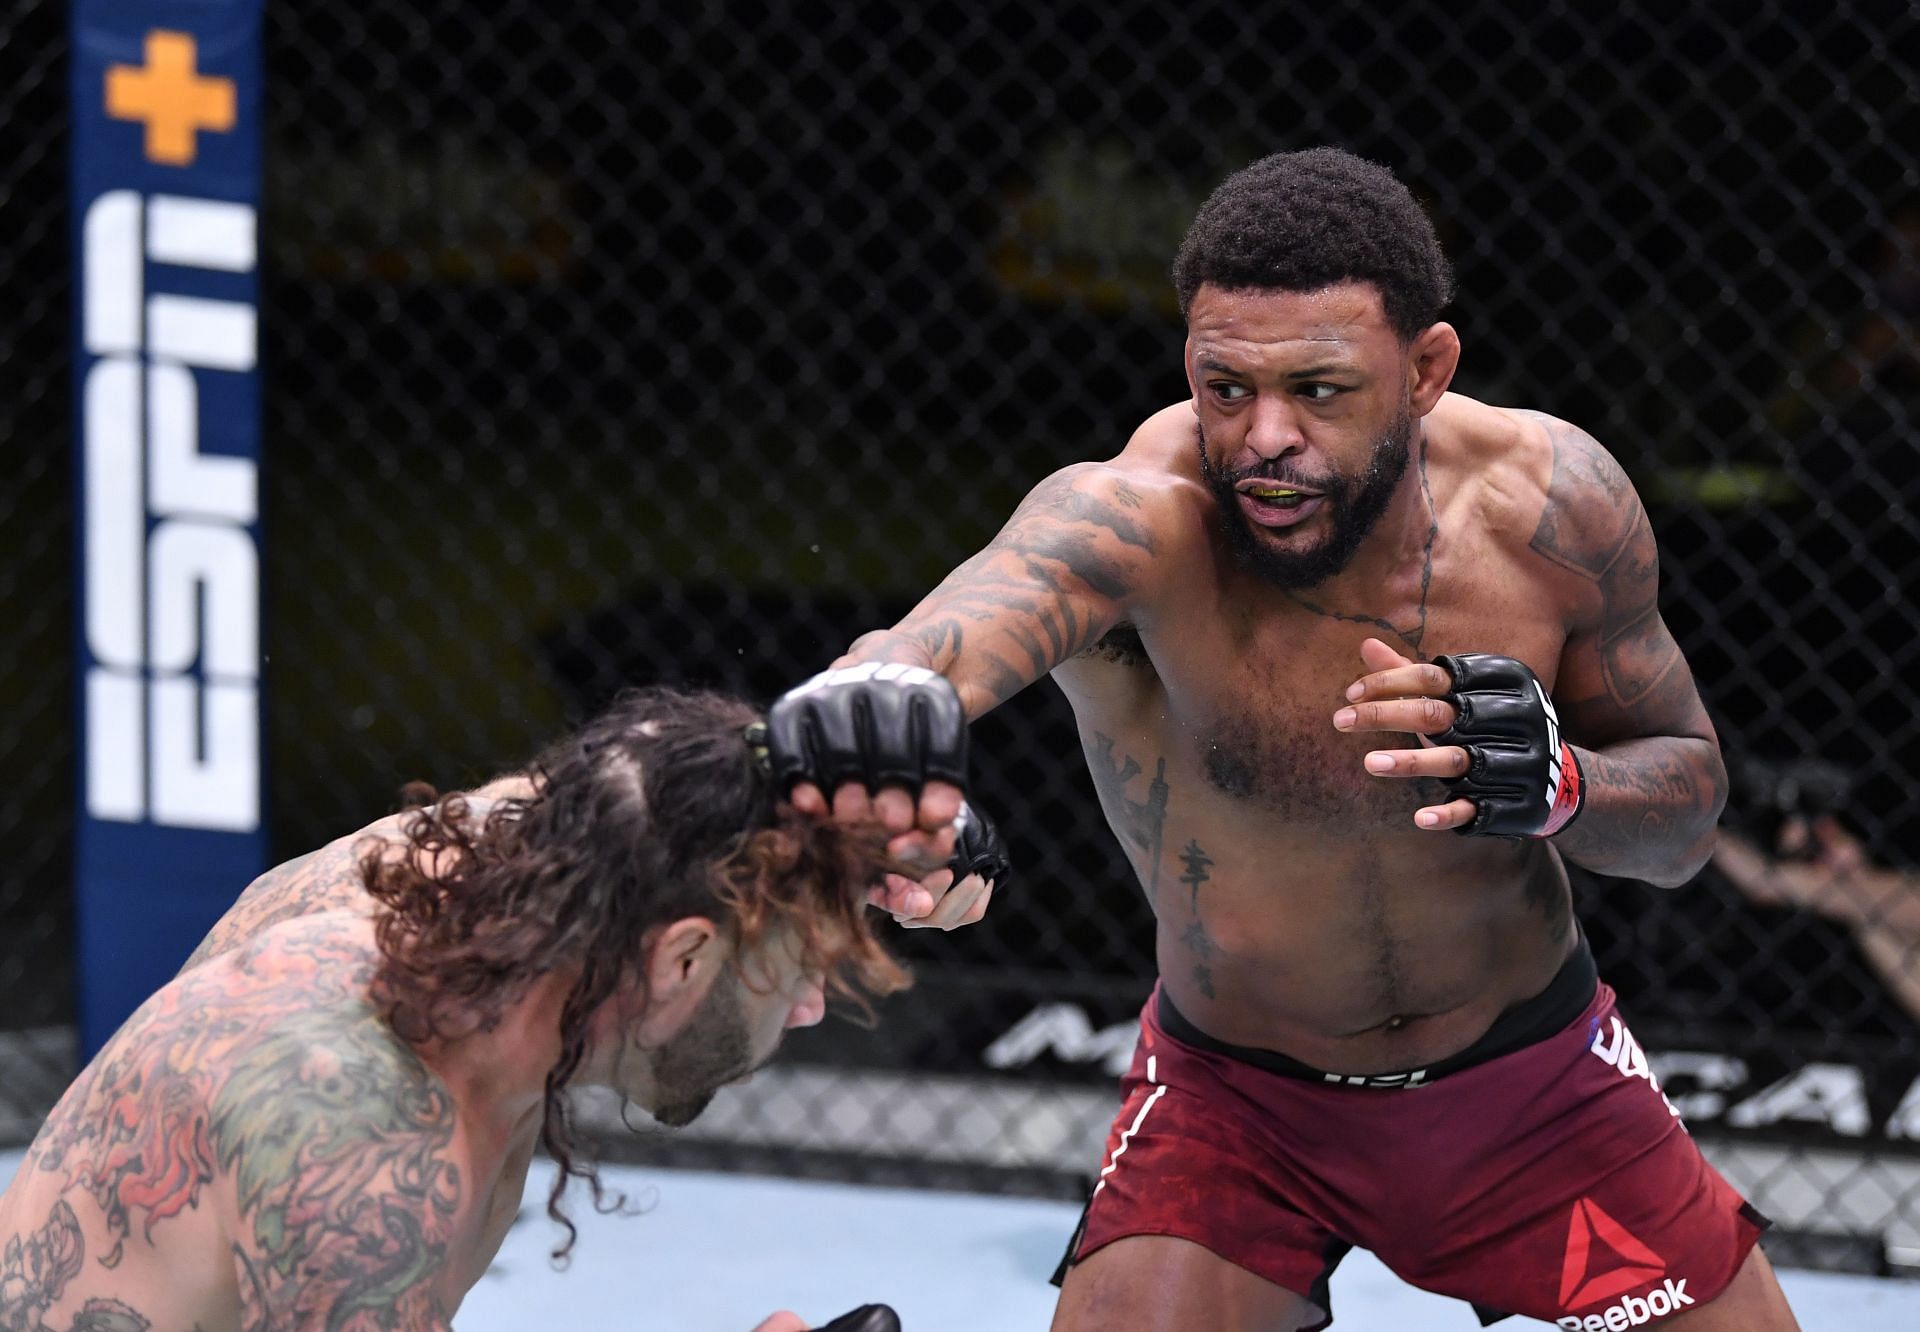 Michael Johnson suffered a controversial split decision loss last weekend